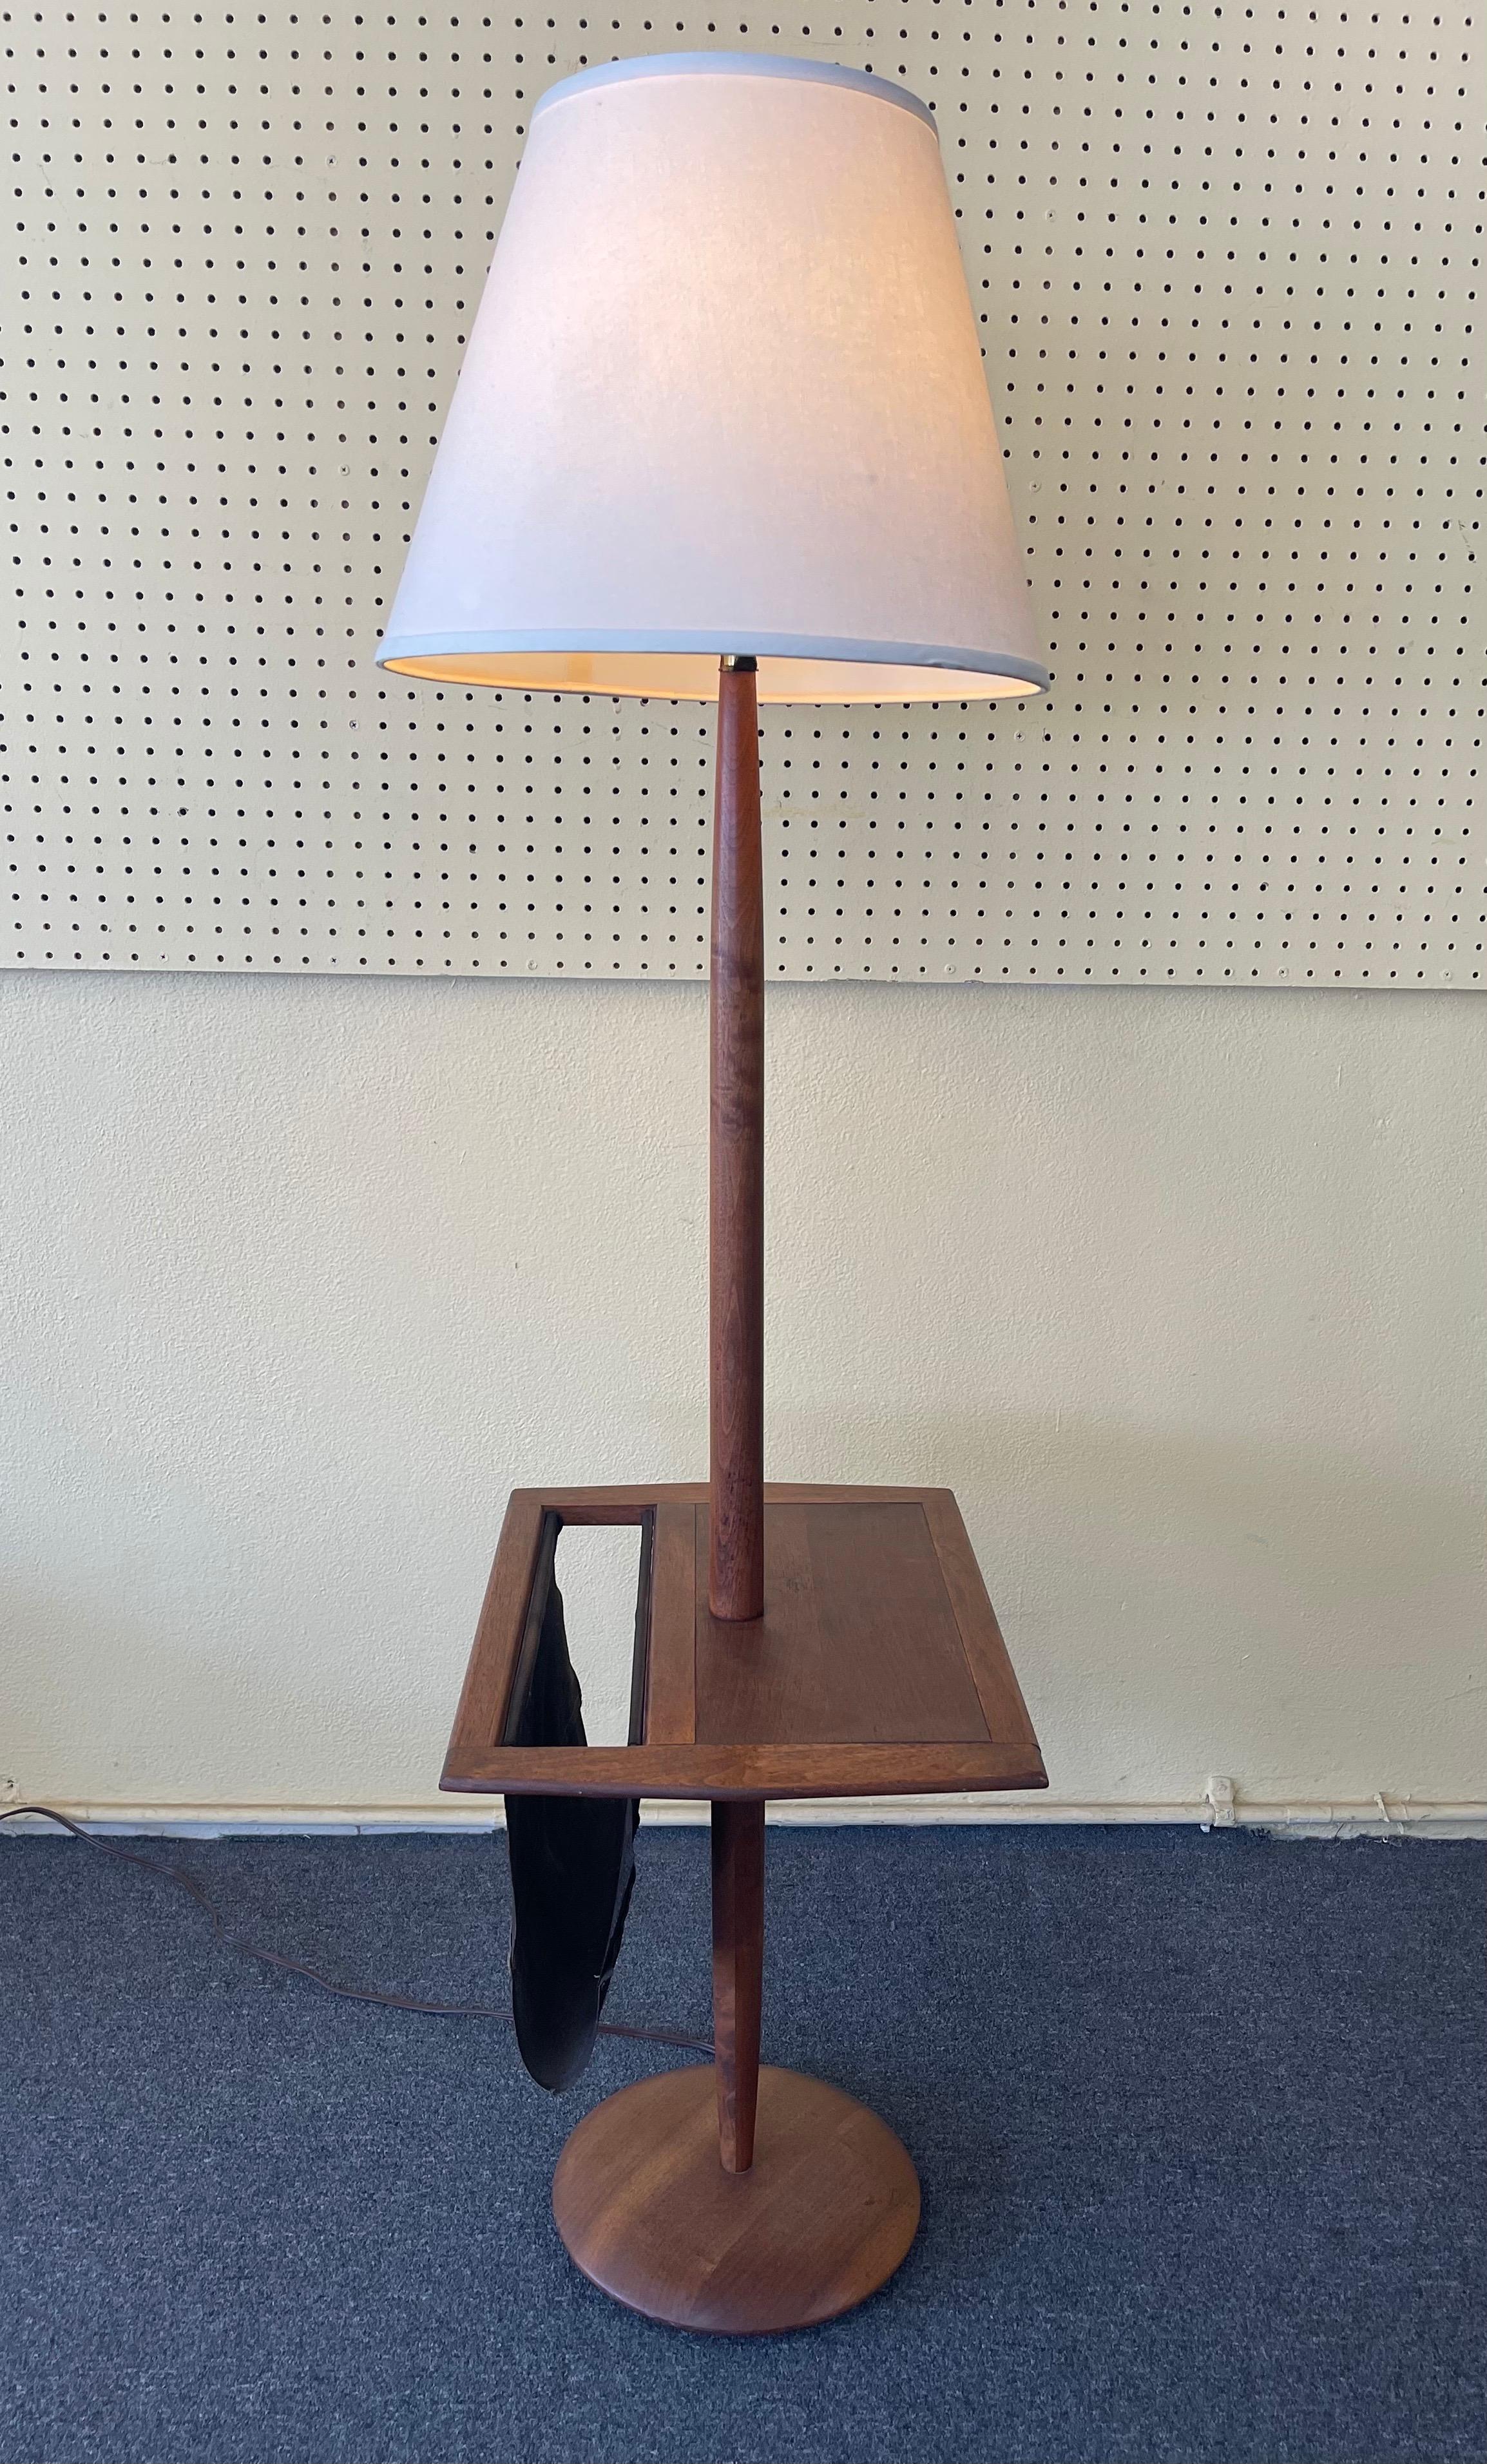 magazine table with lamp